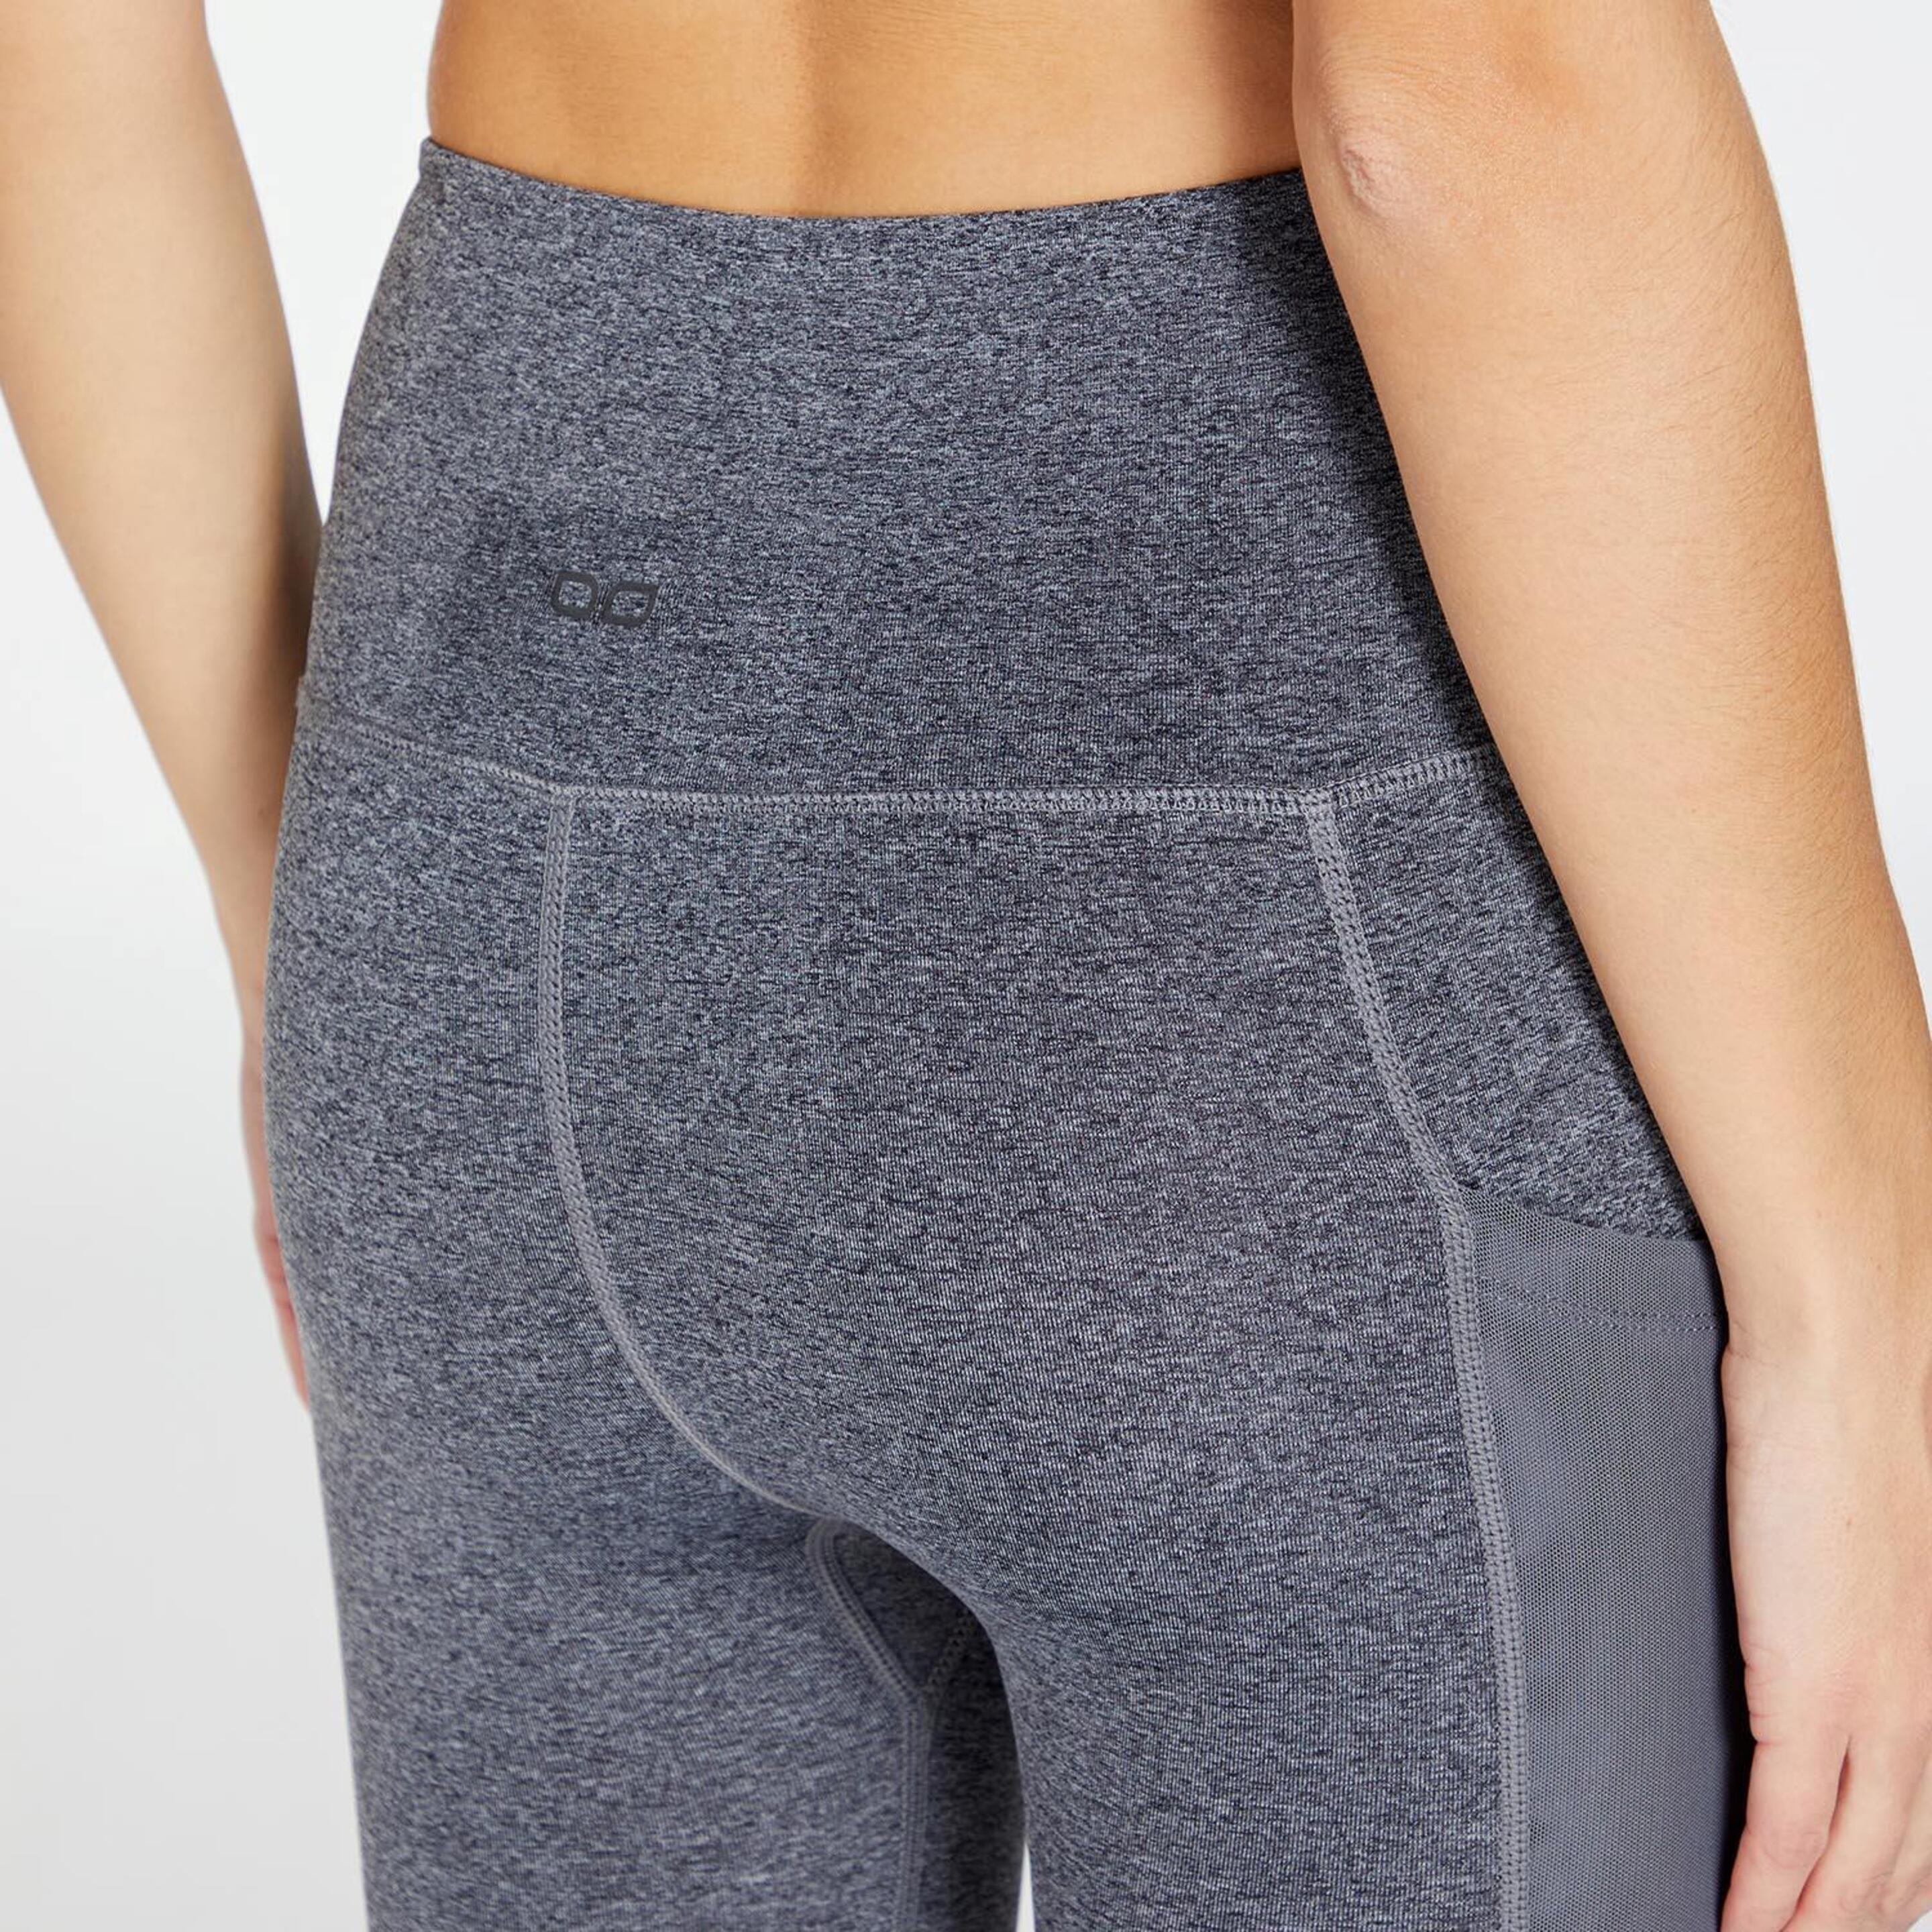 Doone Supportive - Gris - Mallas Fitness Mujer